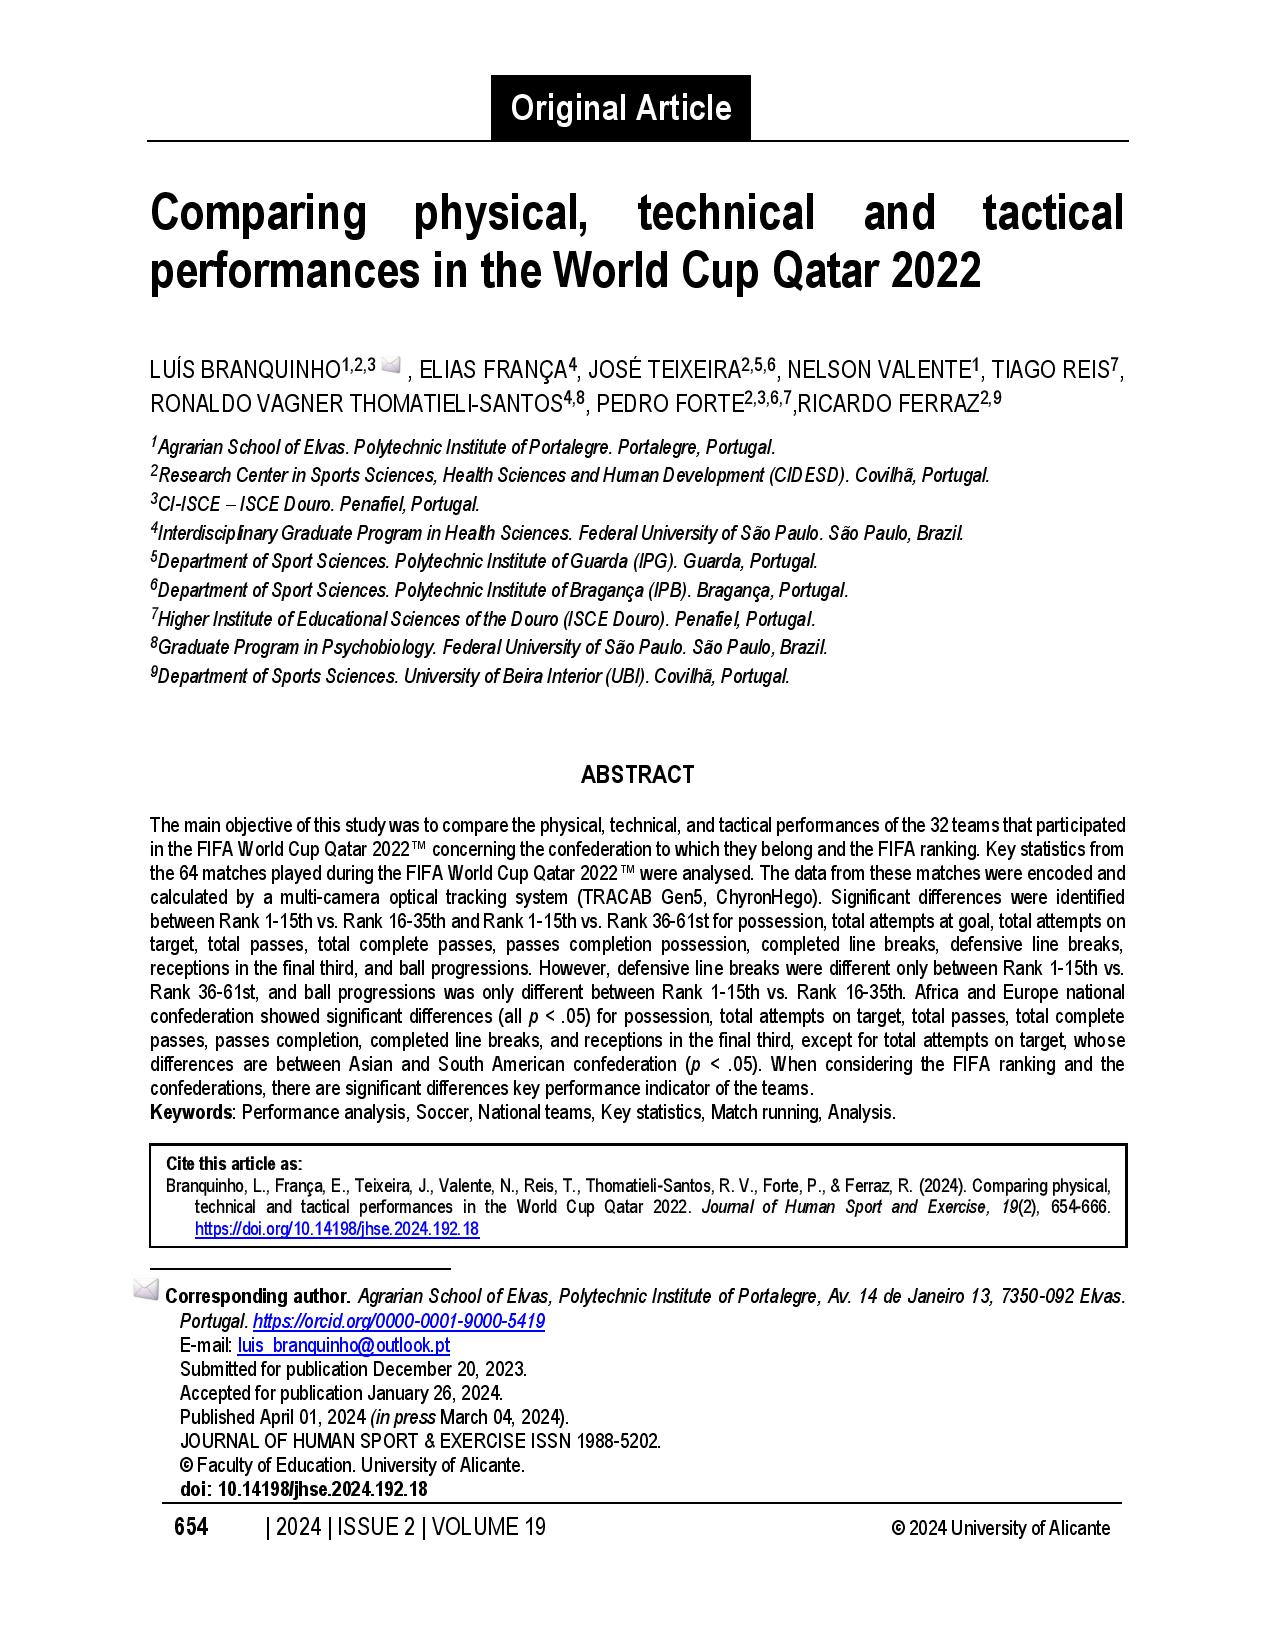 Comparing physical, technical and tactical performances in the World Cup Qatar 2022